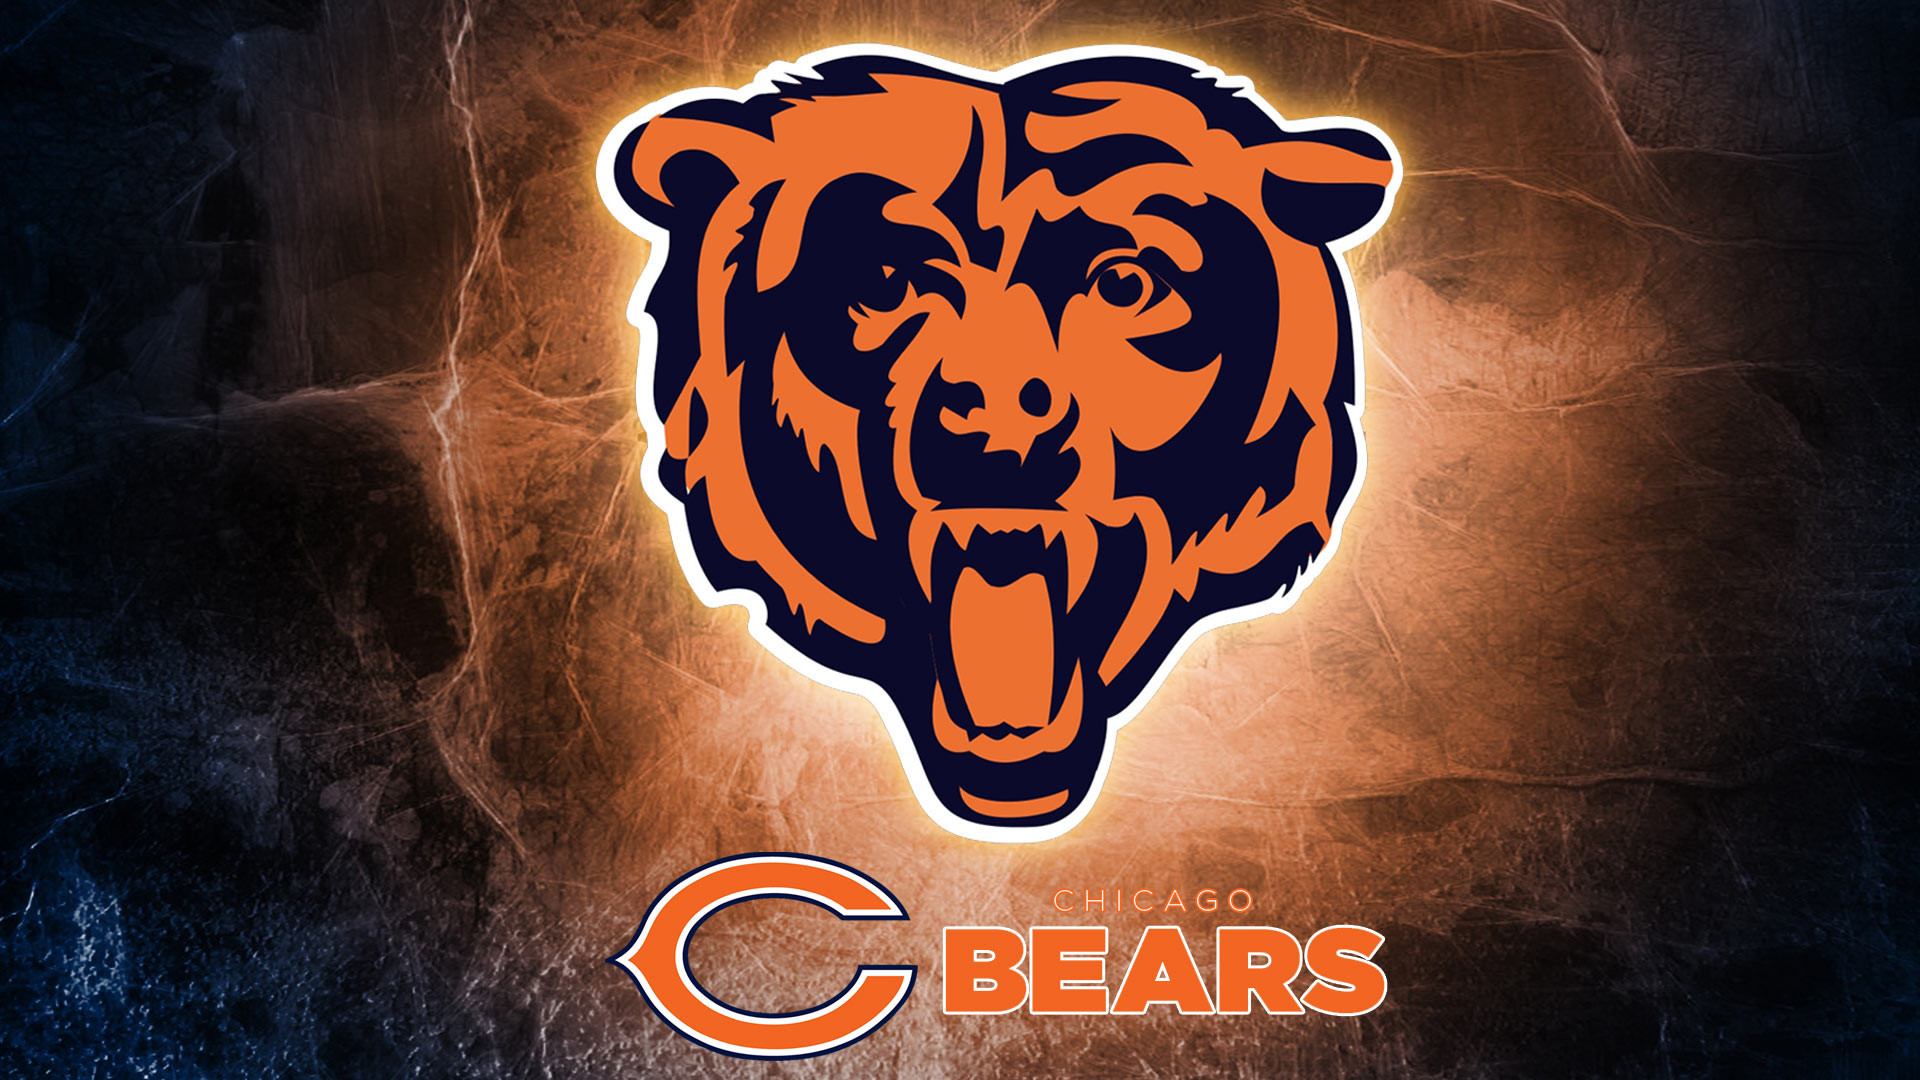 Chicago Bears 2018 Wallpapers 57+ images